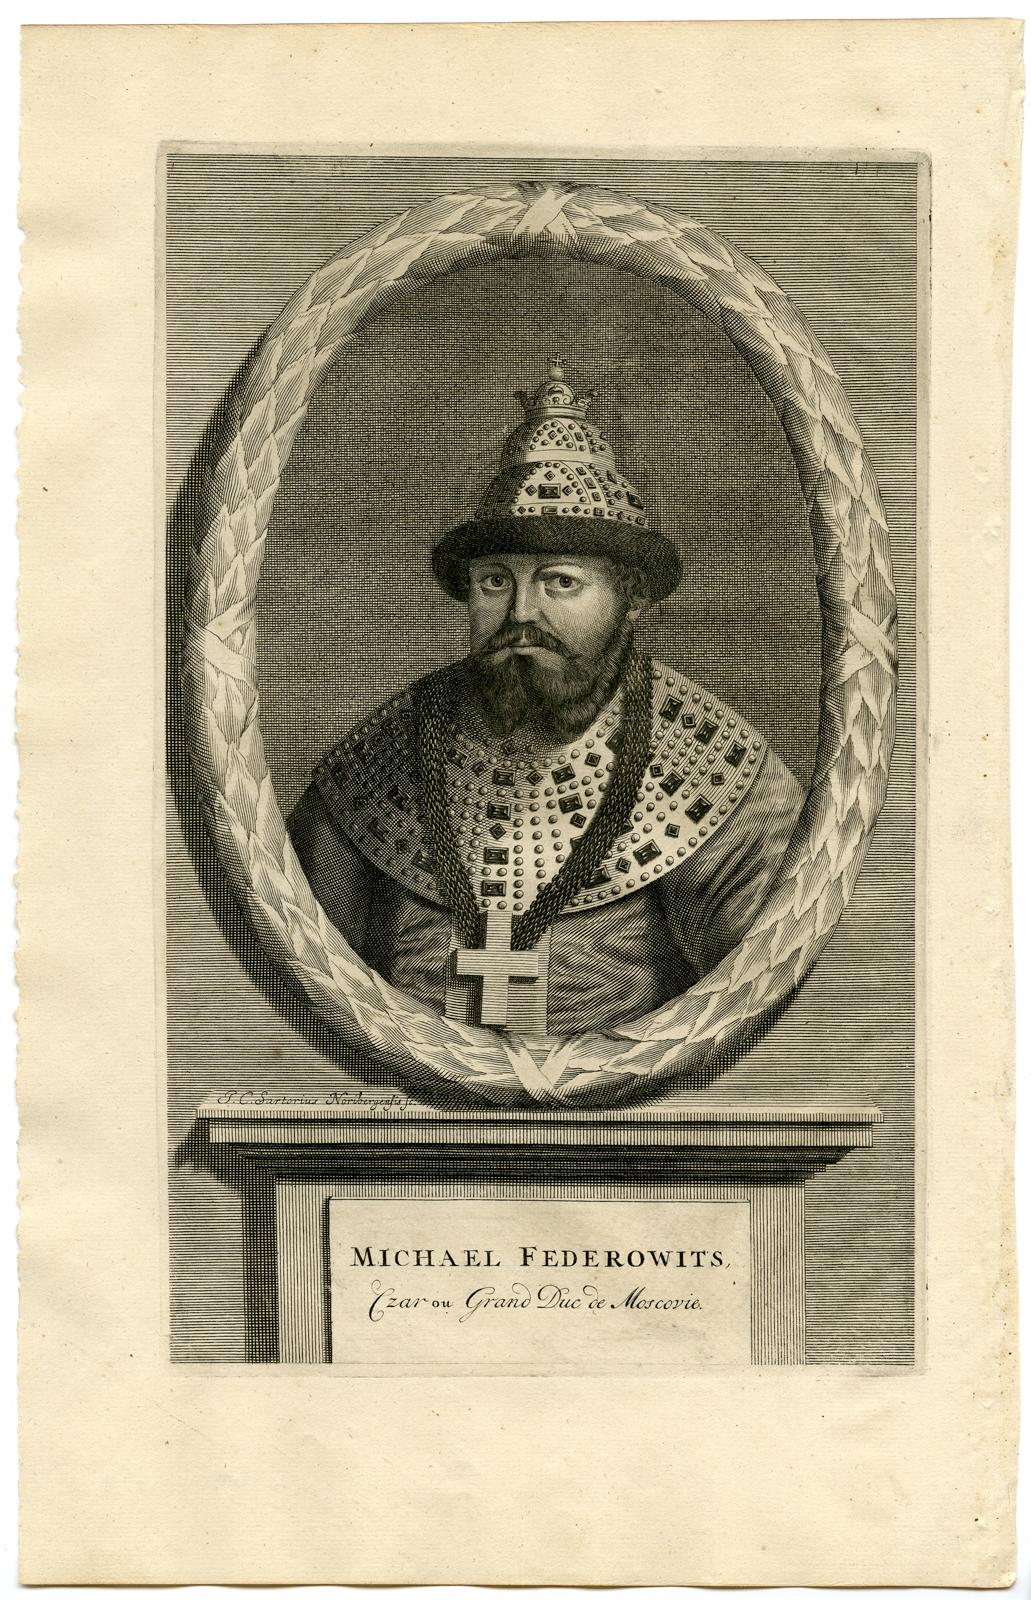 Subject: Antique print, titled: 'Michael Federowits, Czar ou Grand Duc de Moscovie.' - Scarce original antique print depicting Michael I of Russia (Mikhail Fyodorovich Romanov) (1596 - 1645), he became the first Russian Tsar of the House of